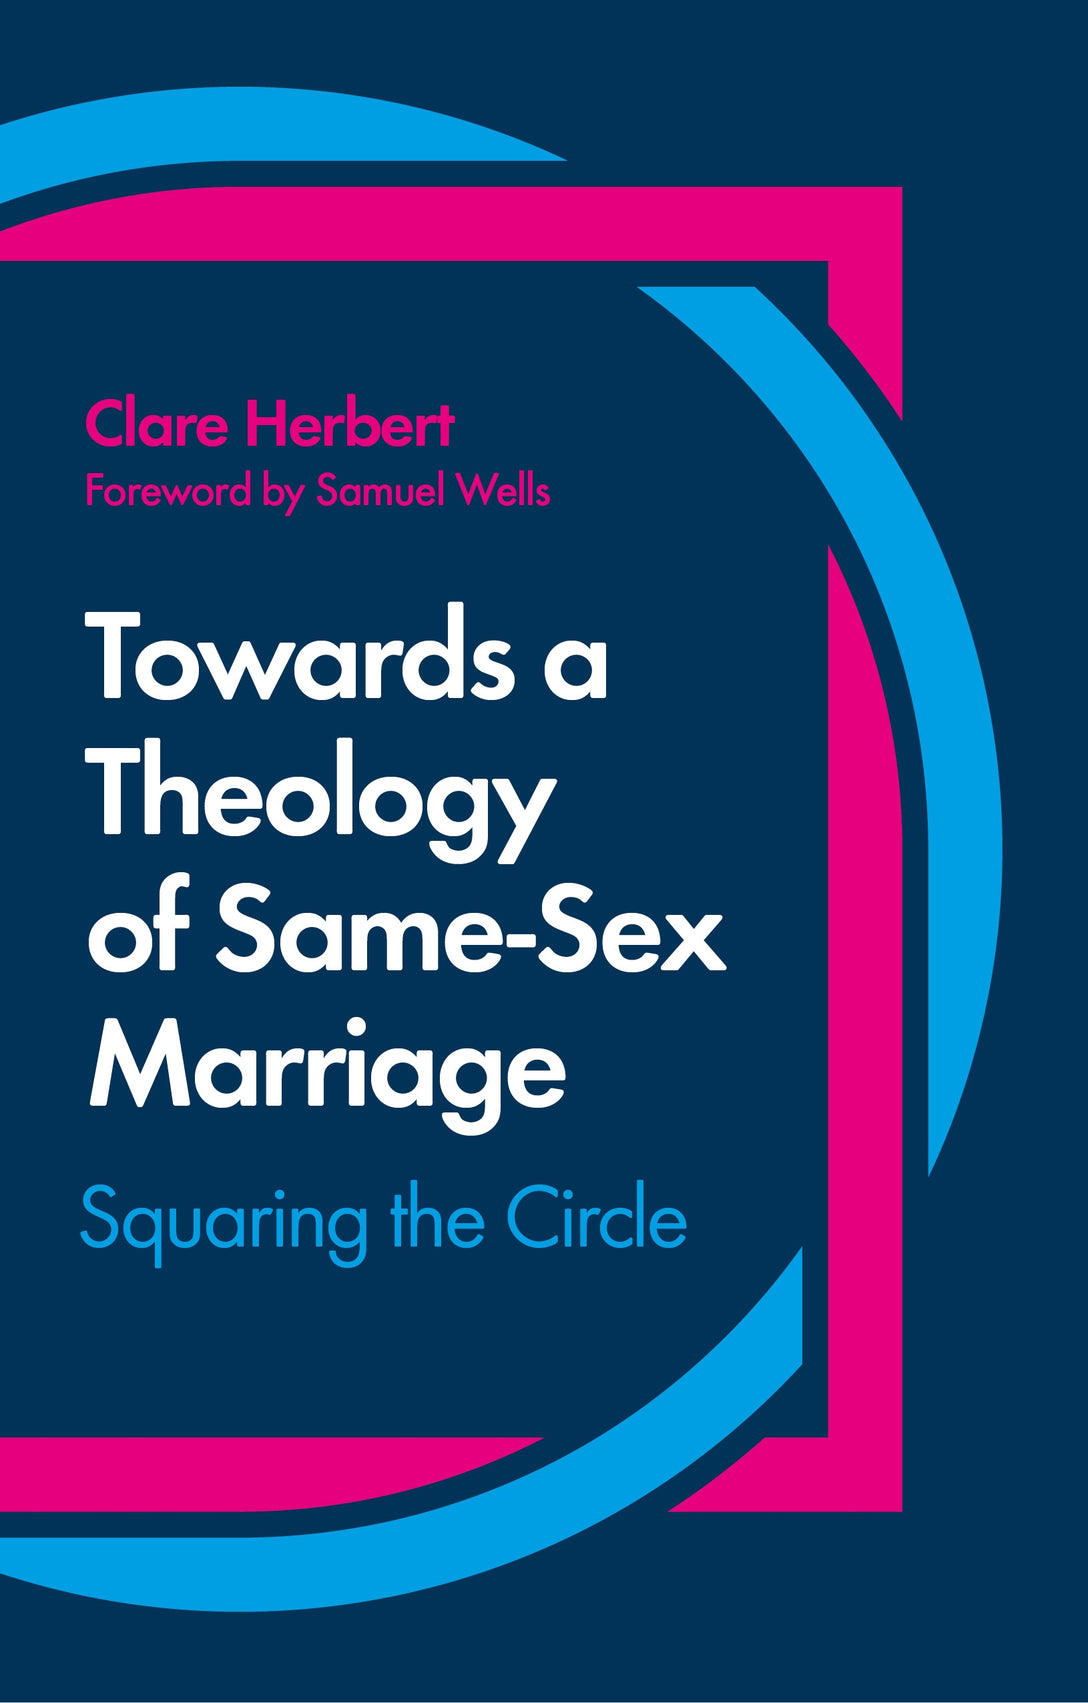 Towards a Theology of Same-Sex Marriage by Clare Herbert